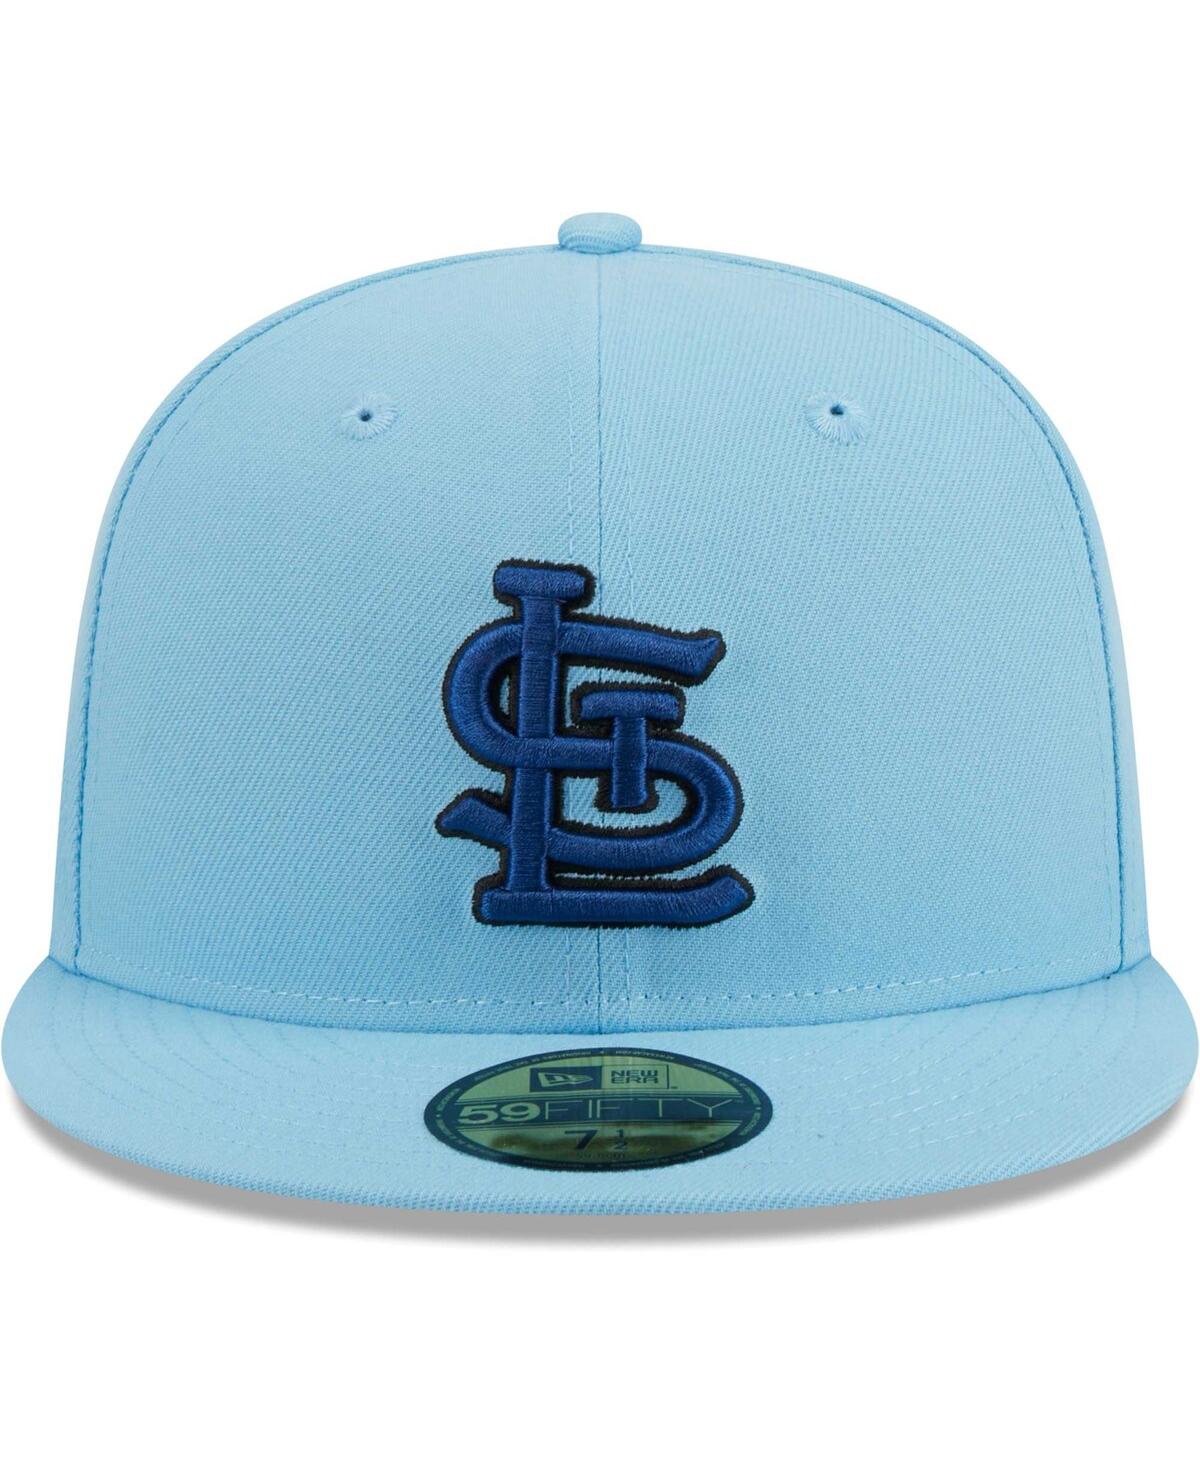 New Era Men's Olive, Blue San Francisco Giants 59FIFTY Fitted Hat